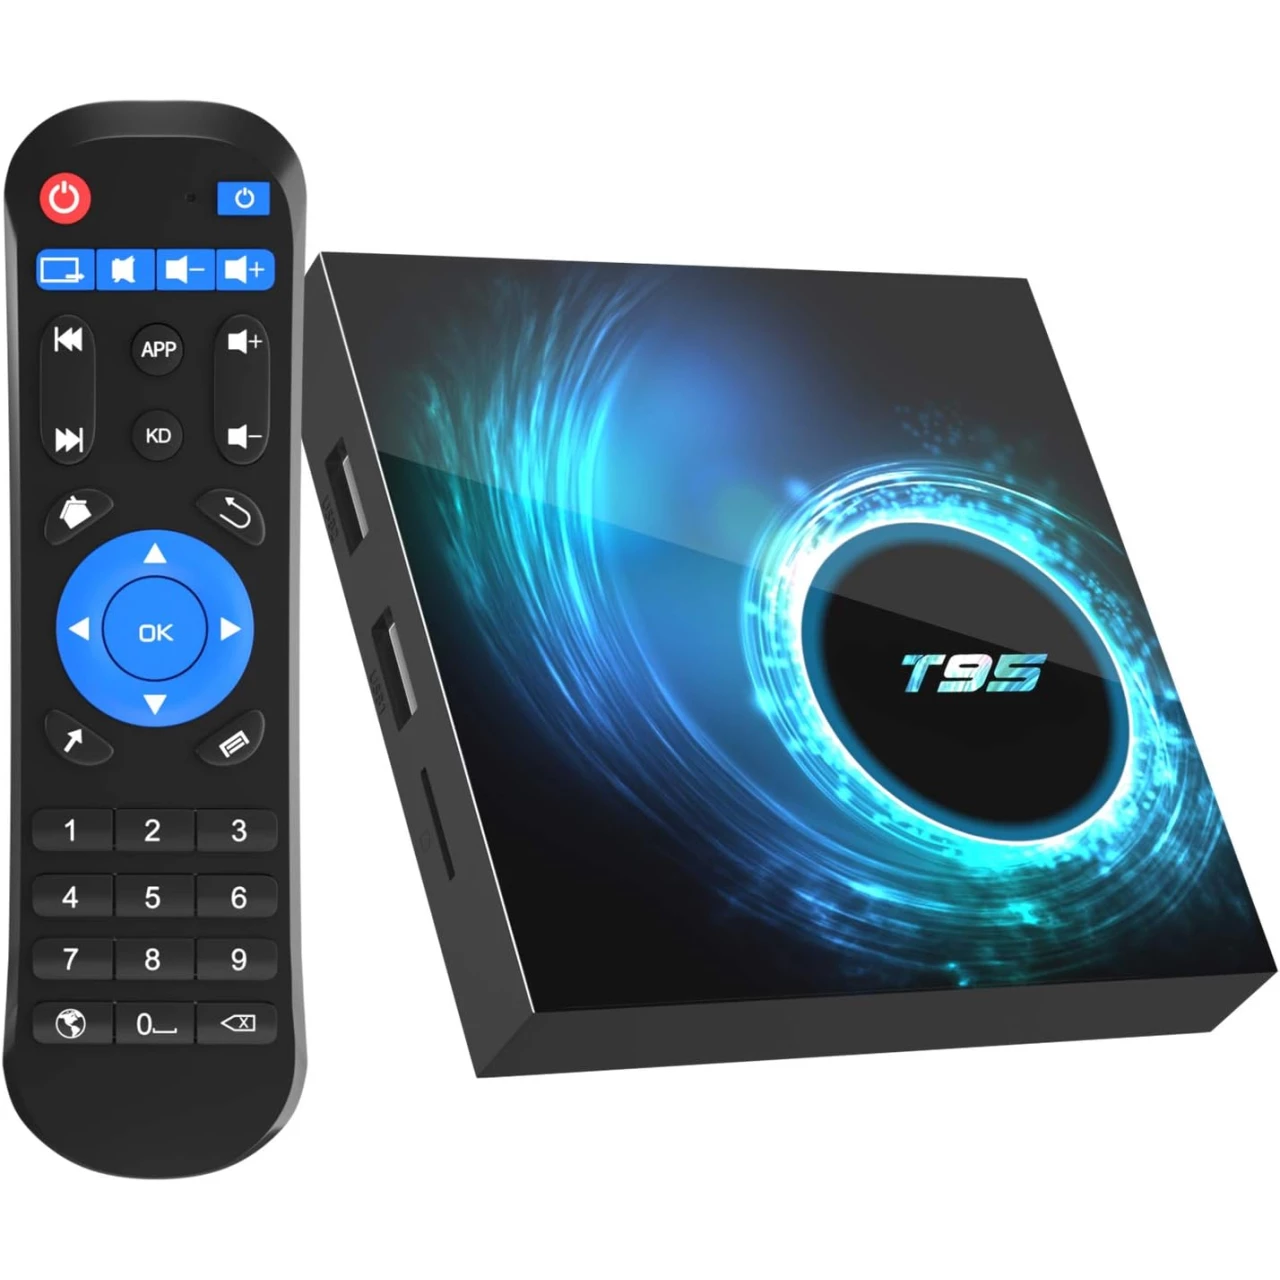 Android 10.0 TV Box, T95 Android Box 4GB RAM 32GB ROM